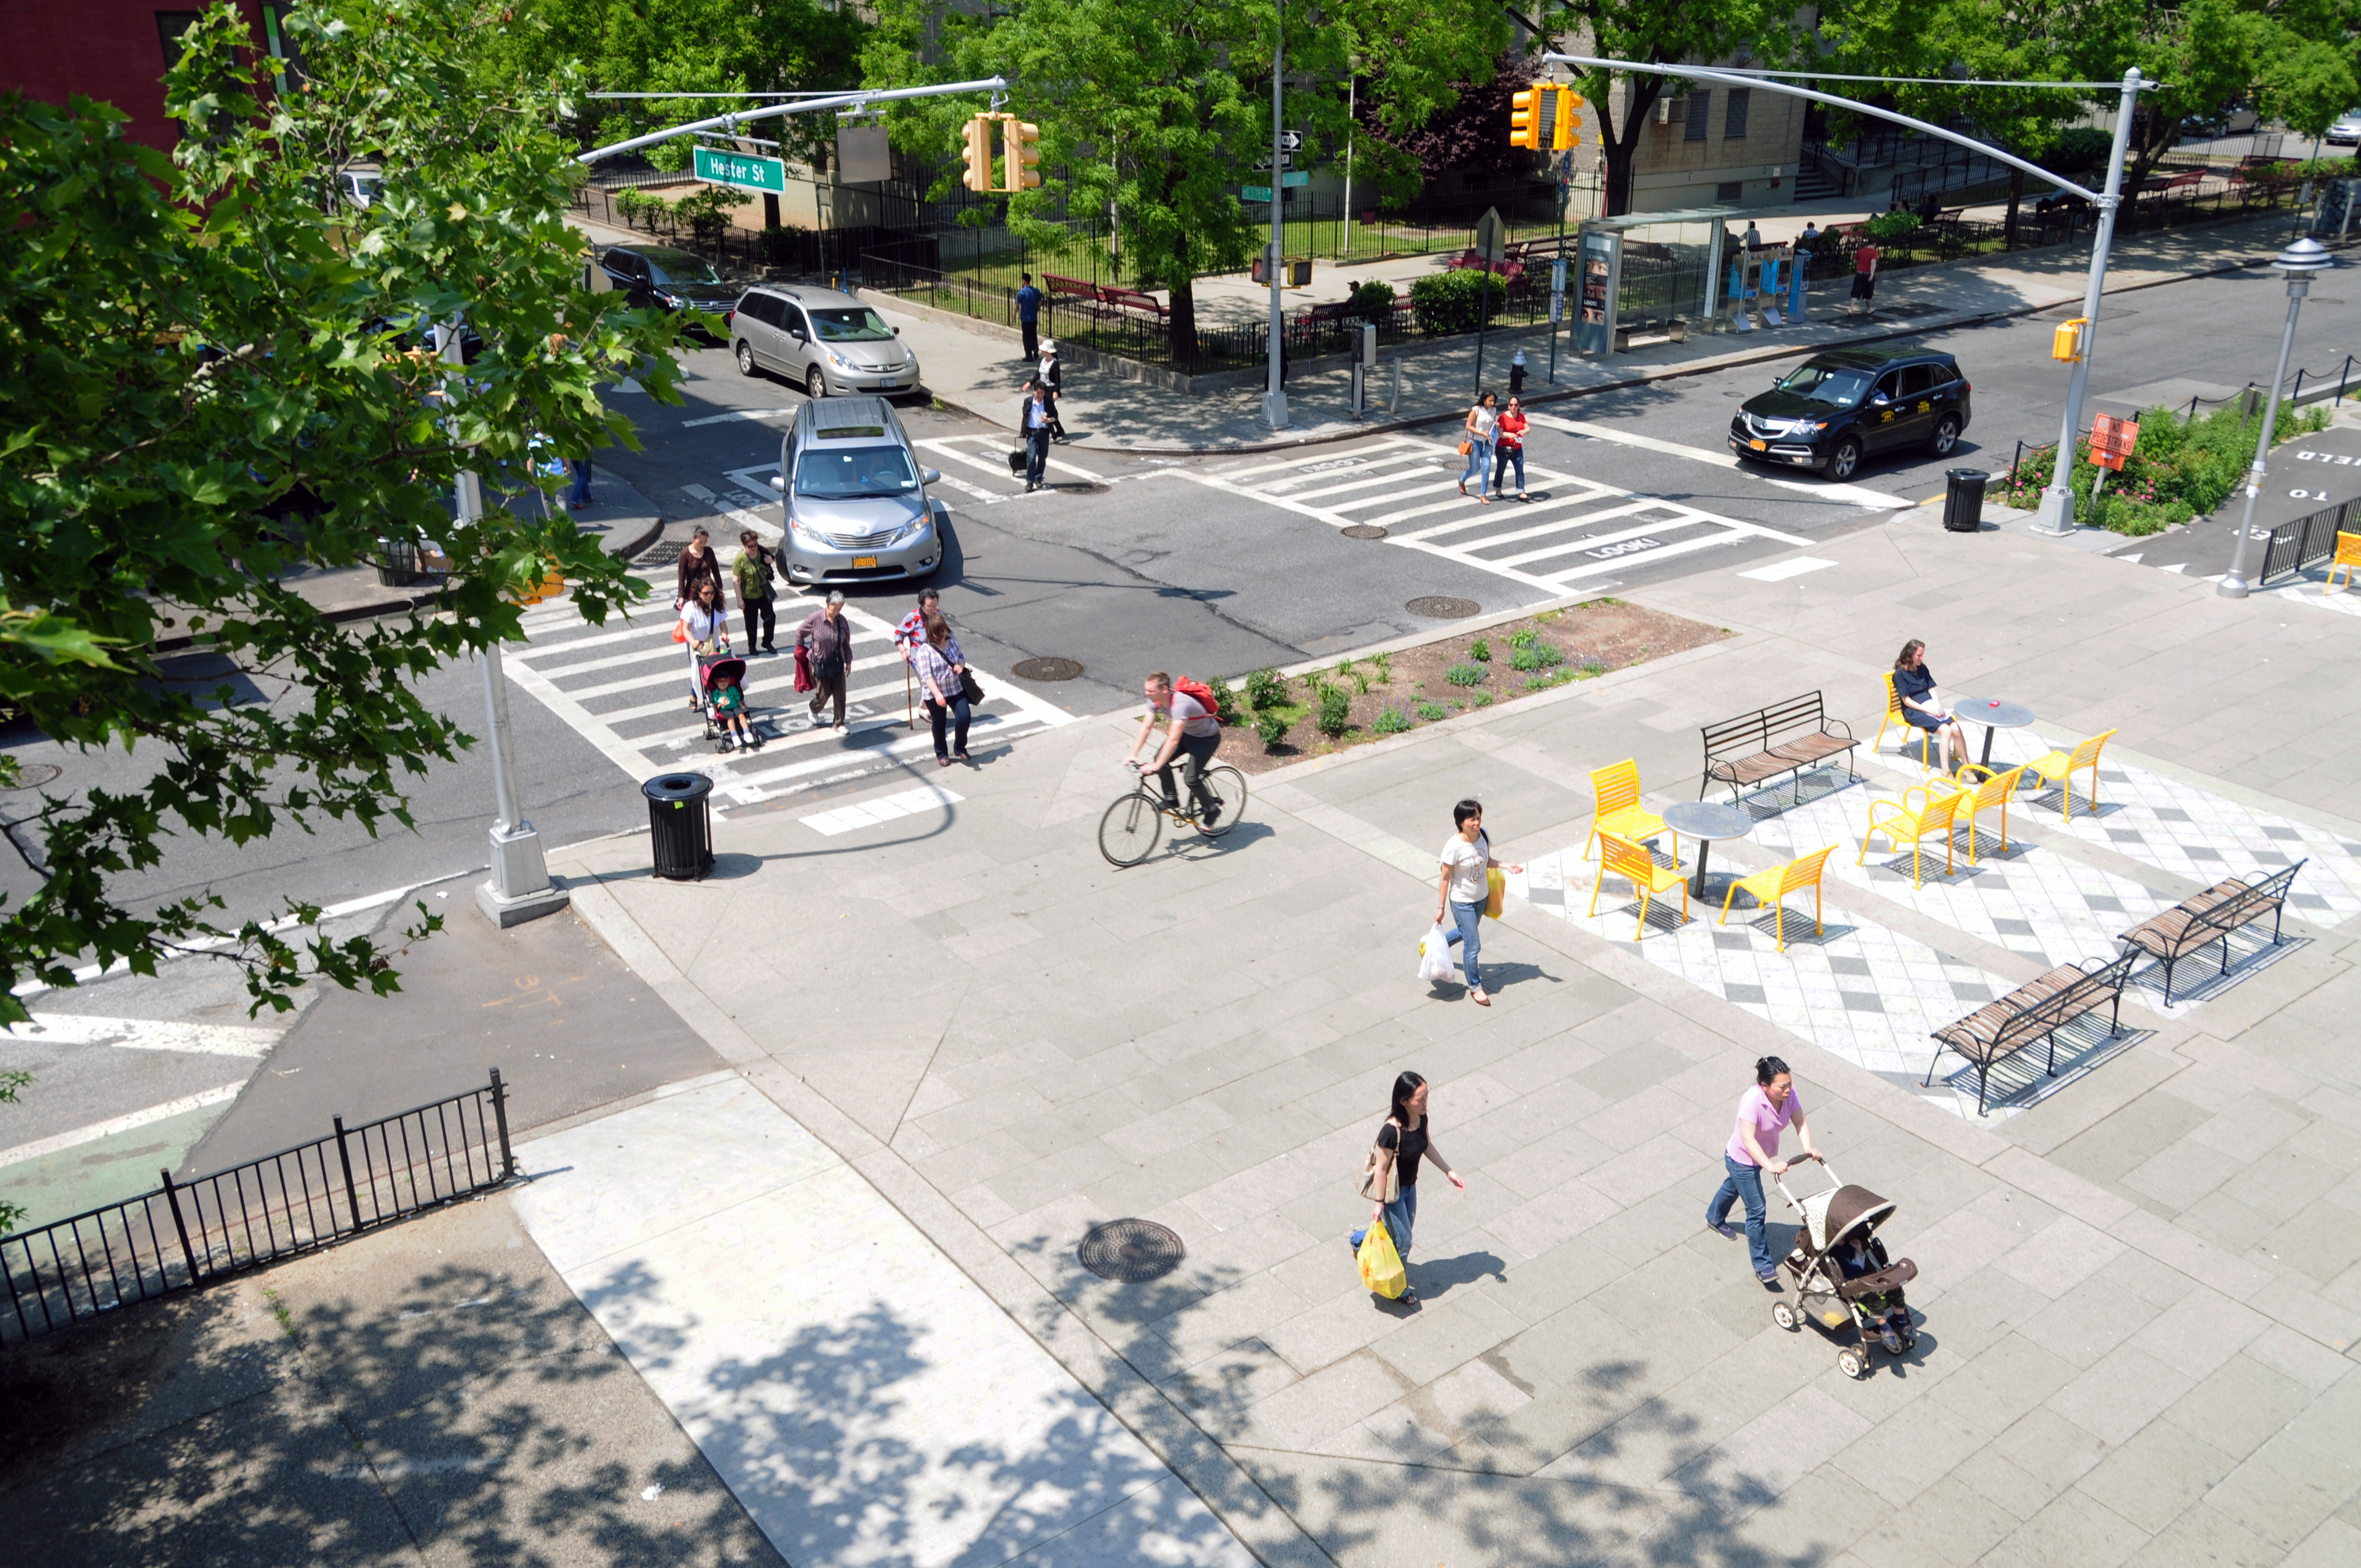 NYC plans to reimagine 5th Avenue as a 'world-class public space' with  expanded pedestrian, bike access 